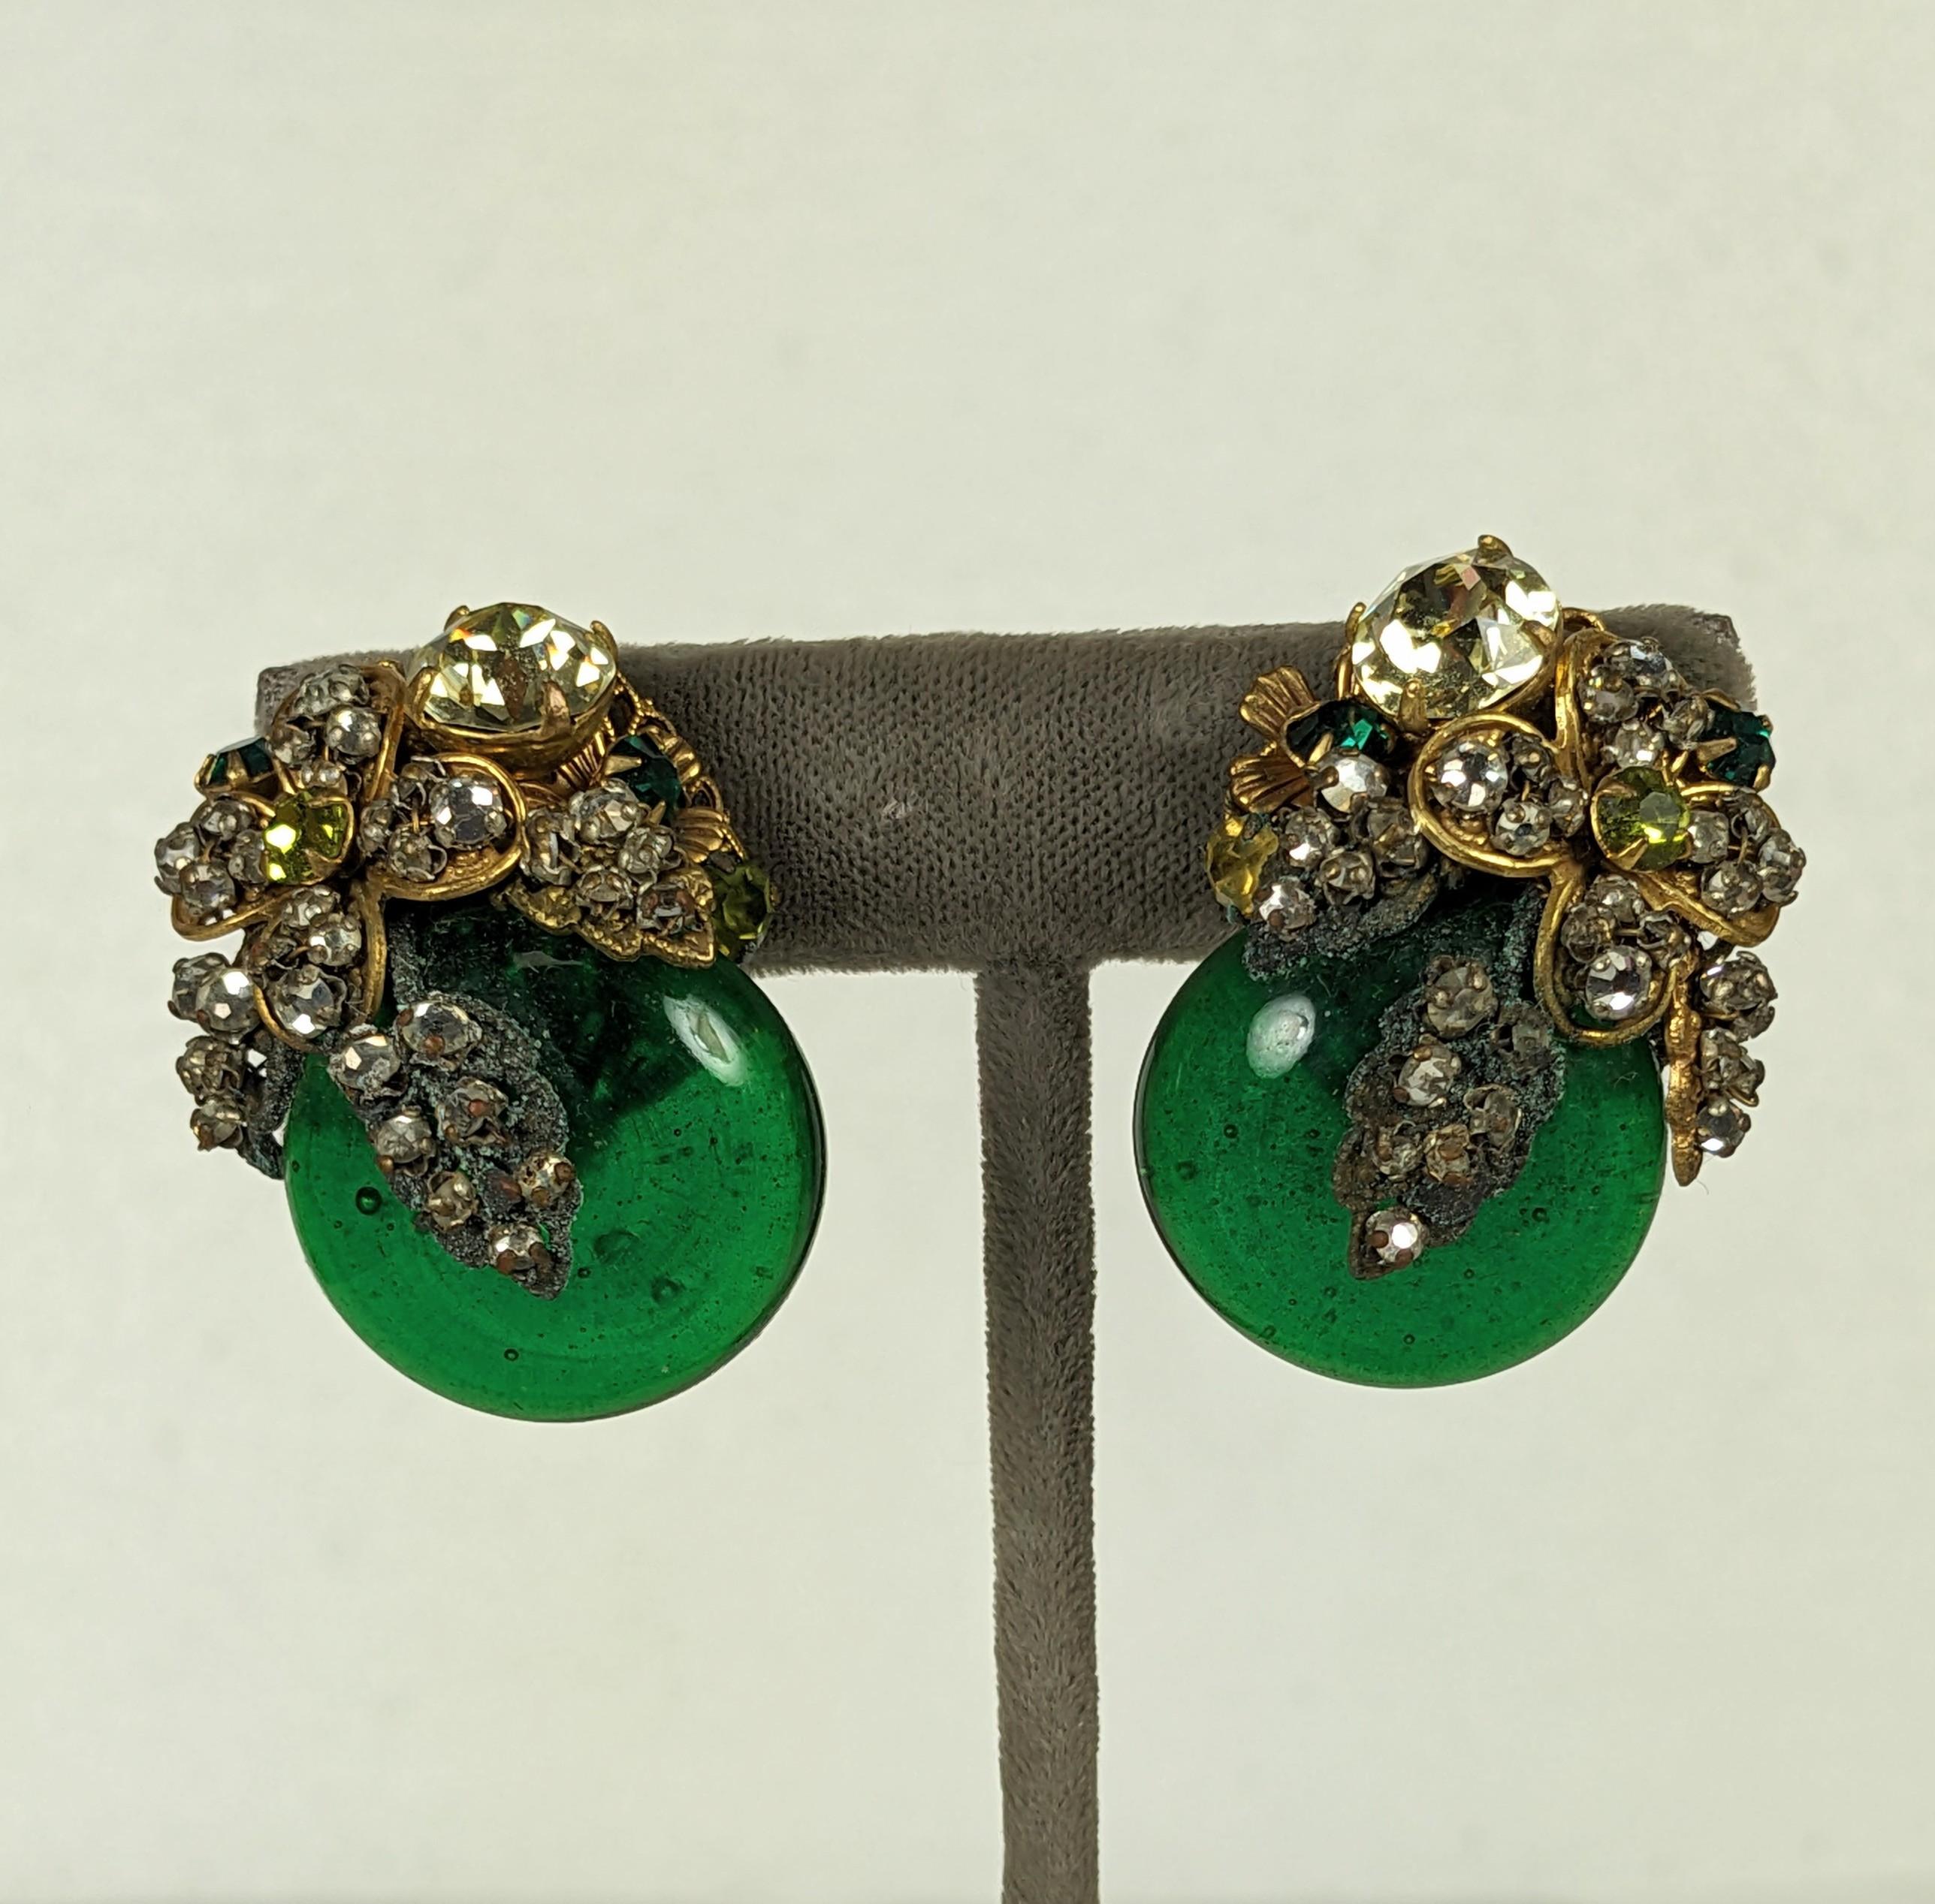 Miriam Haskell Ornate Emerald Gripoix Glass Earrings from the 1950's. Large emerald pate de verre cabs are embroidered with stones on Russian gilt filigrees in citrine, emerald, peridot and crystal. Superb hand made quality and striking size. 1 3/8